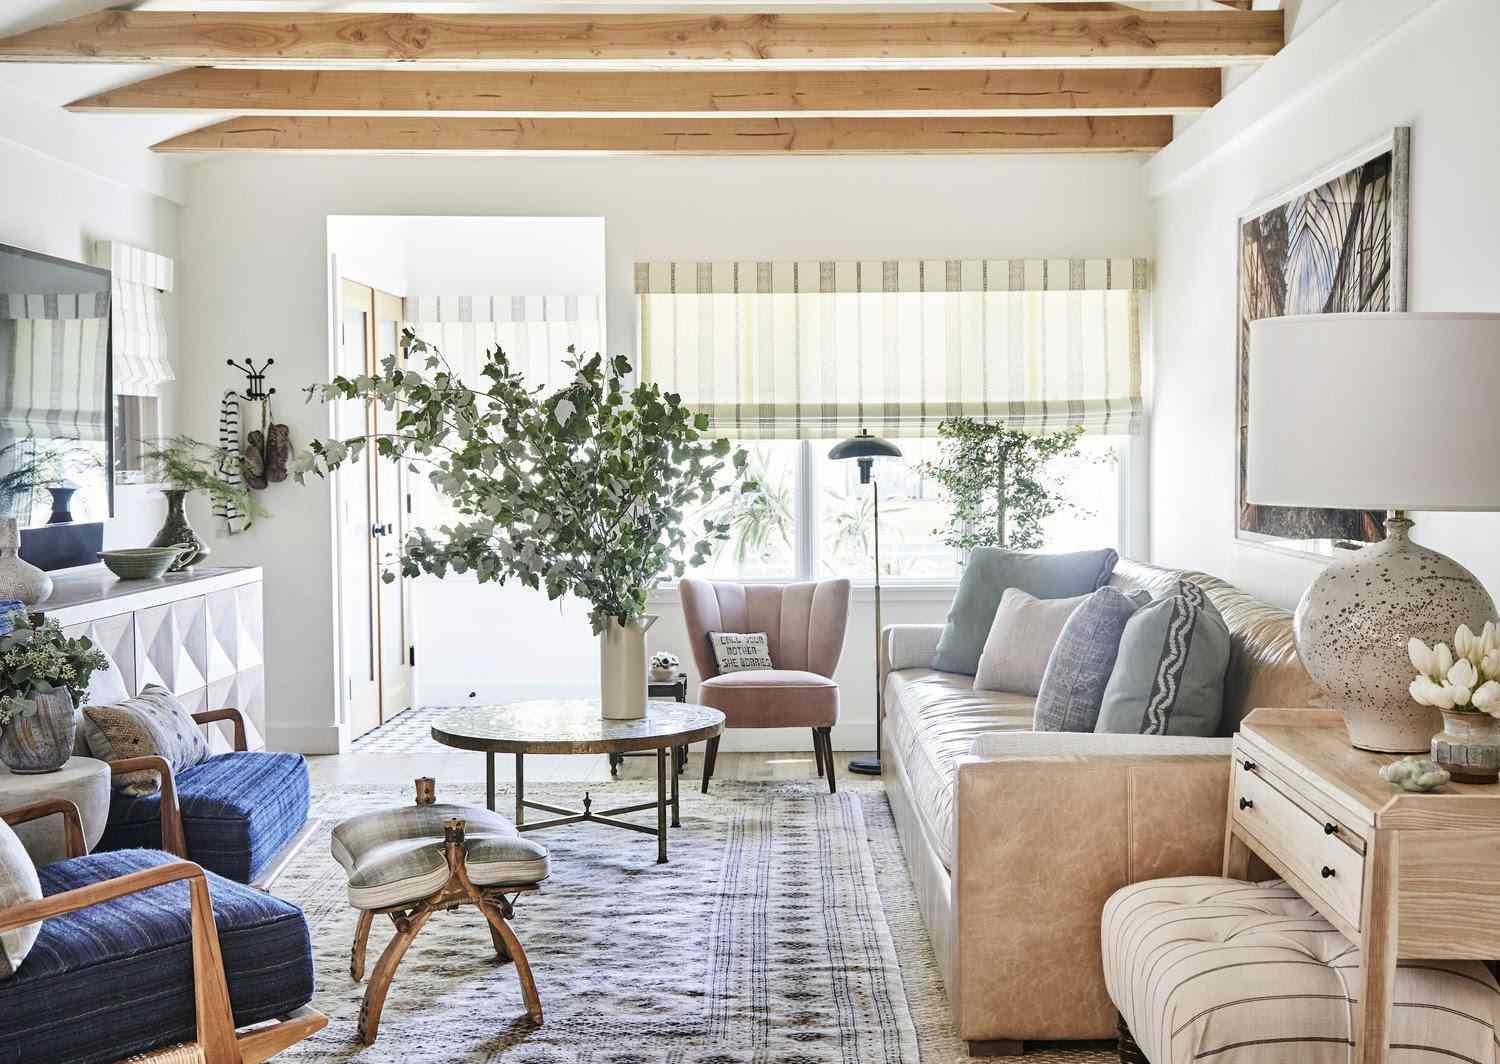 Elegant Living Room Decor: An Inviting Abode Of Comfort And Style